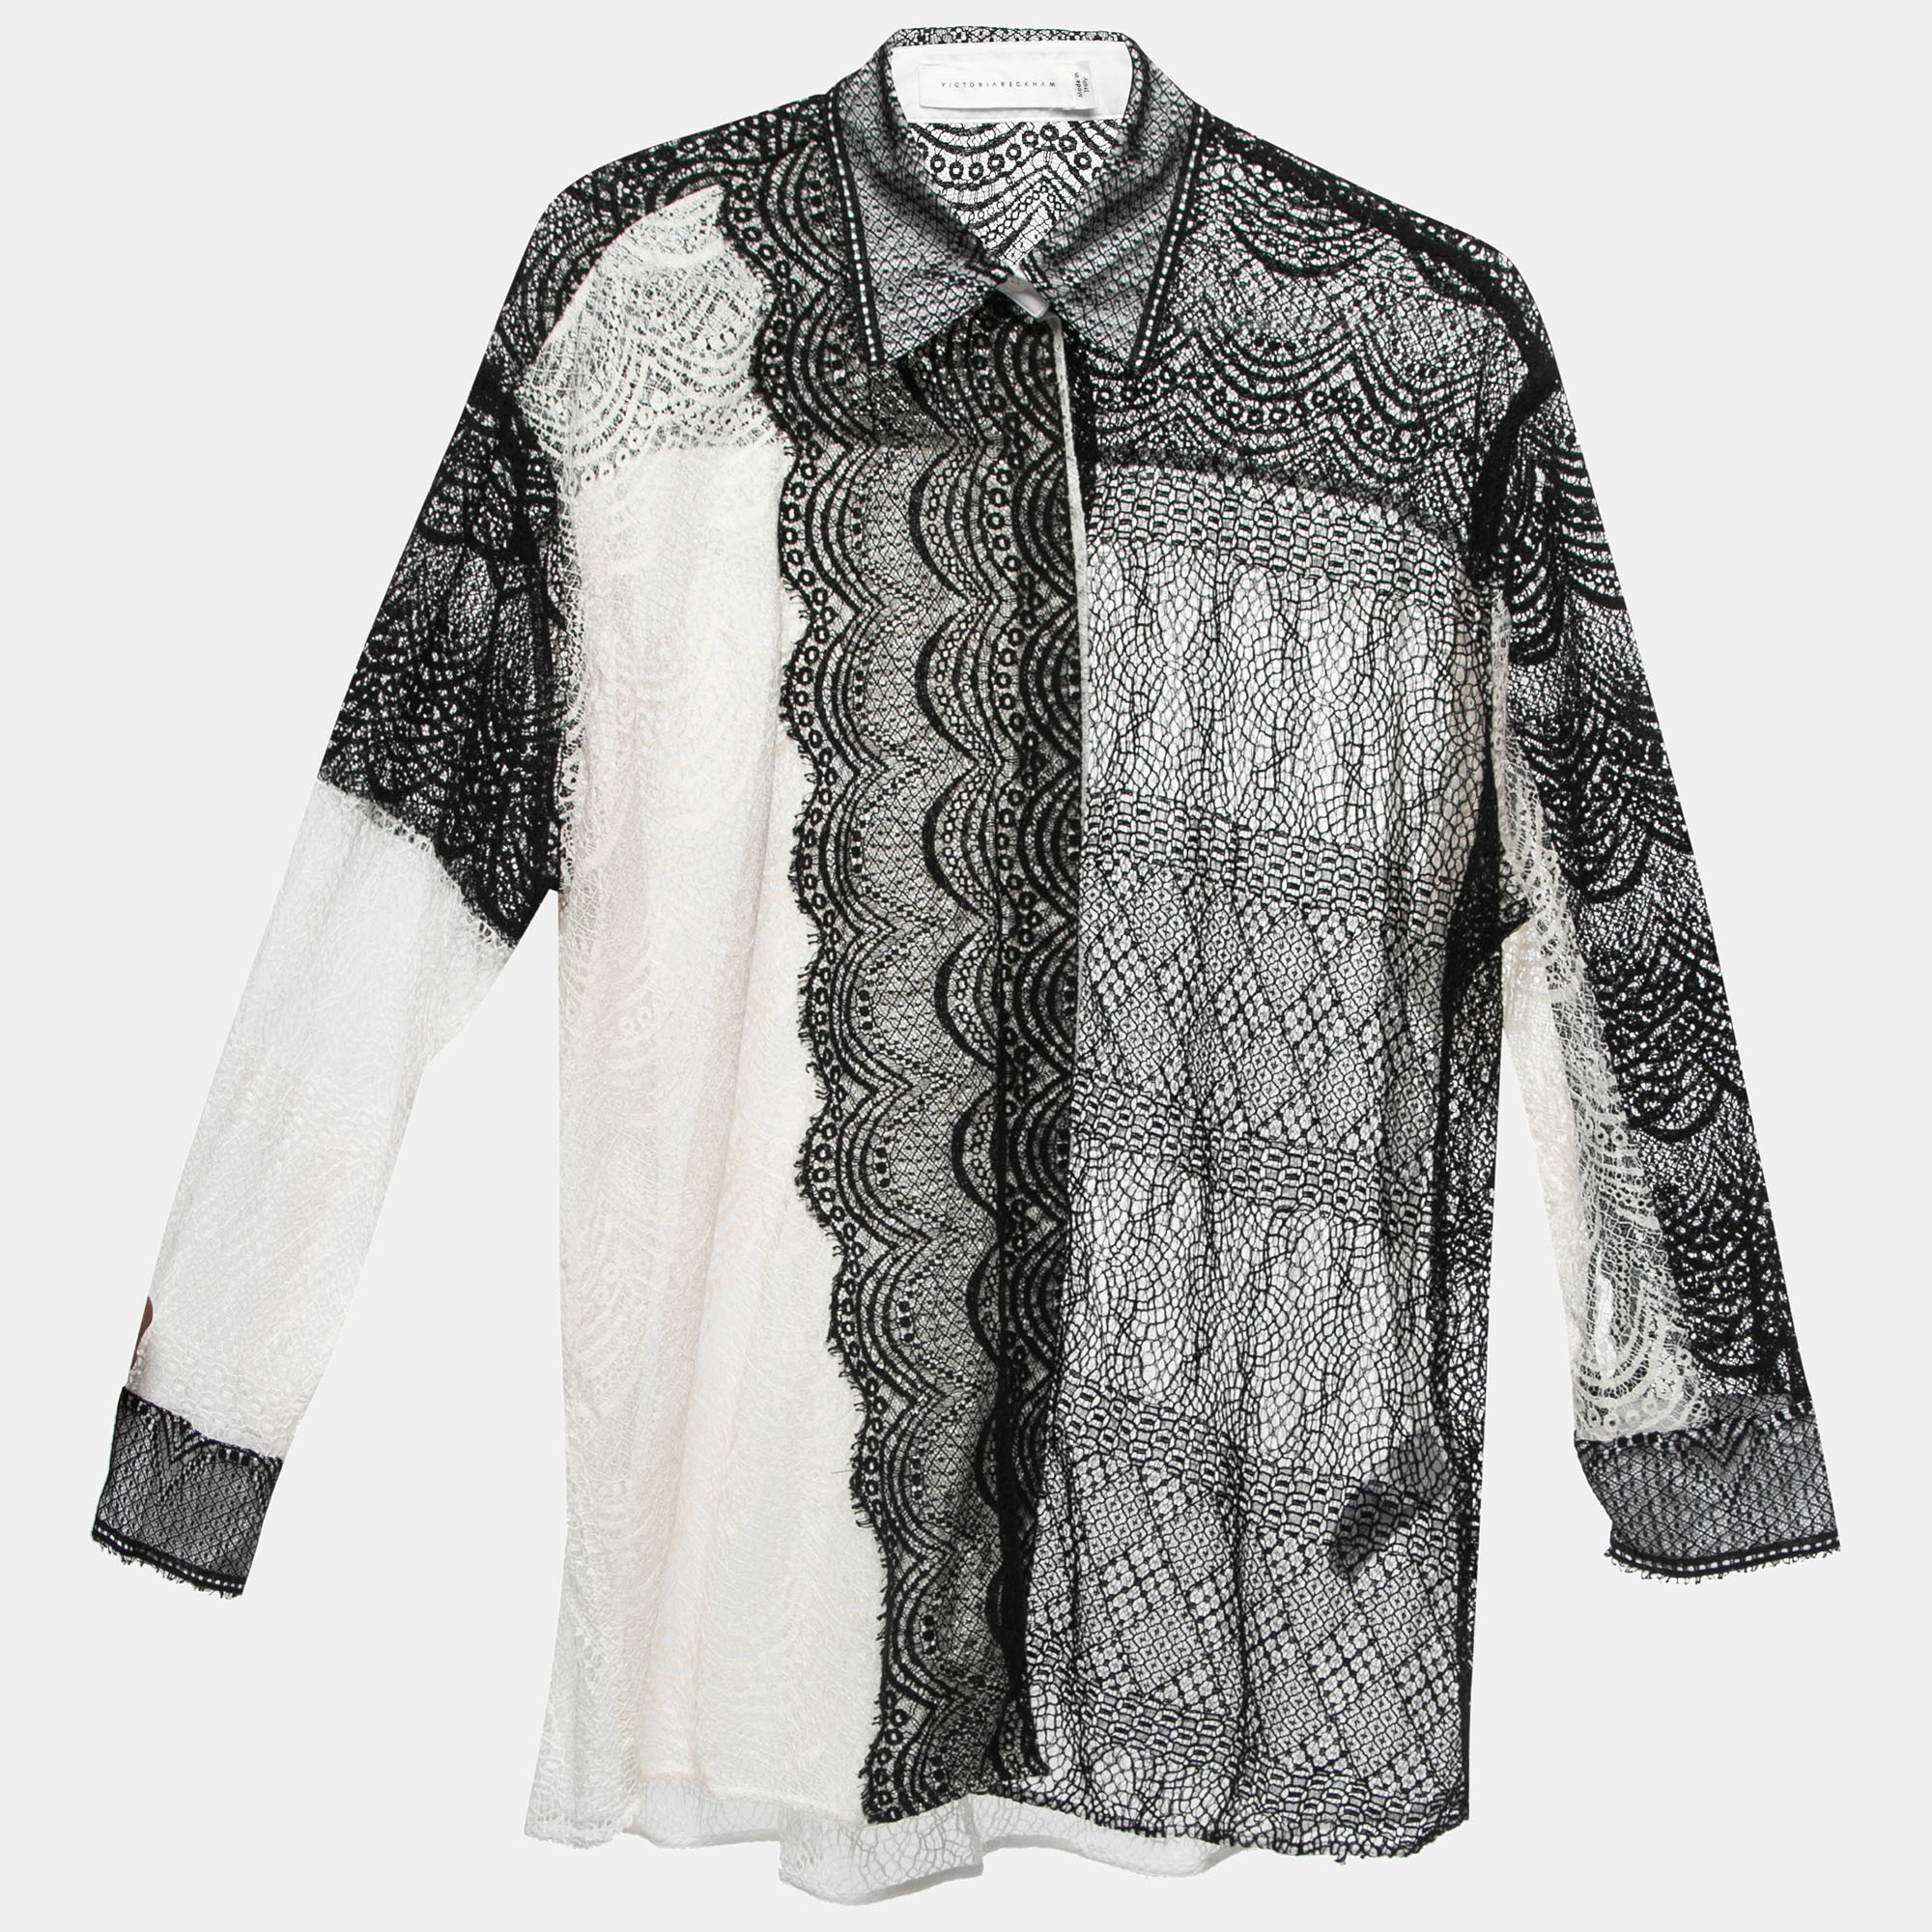 

Victoria Beckham Black/White Patterned Lace Button Front Full Sleeve Shirt S